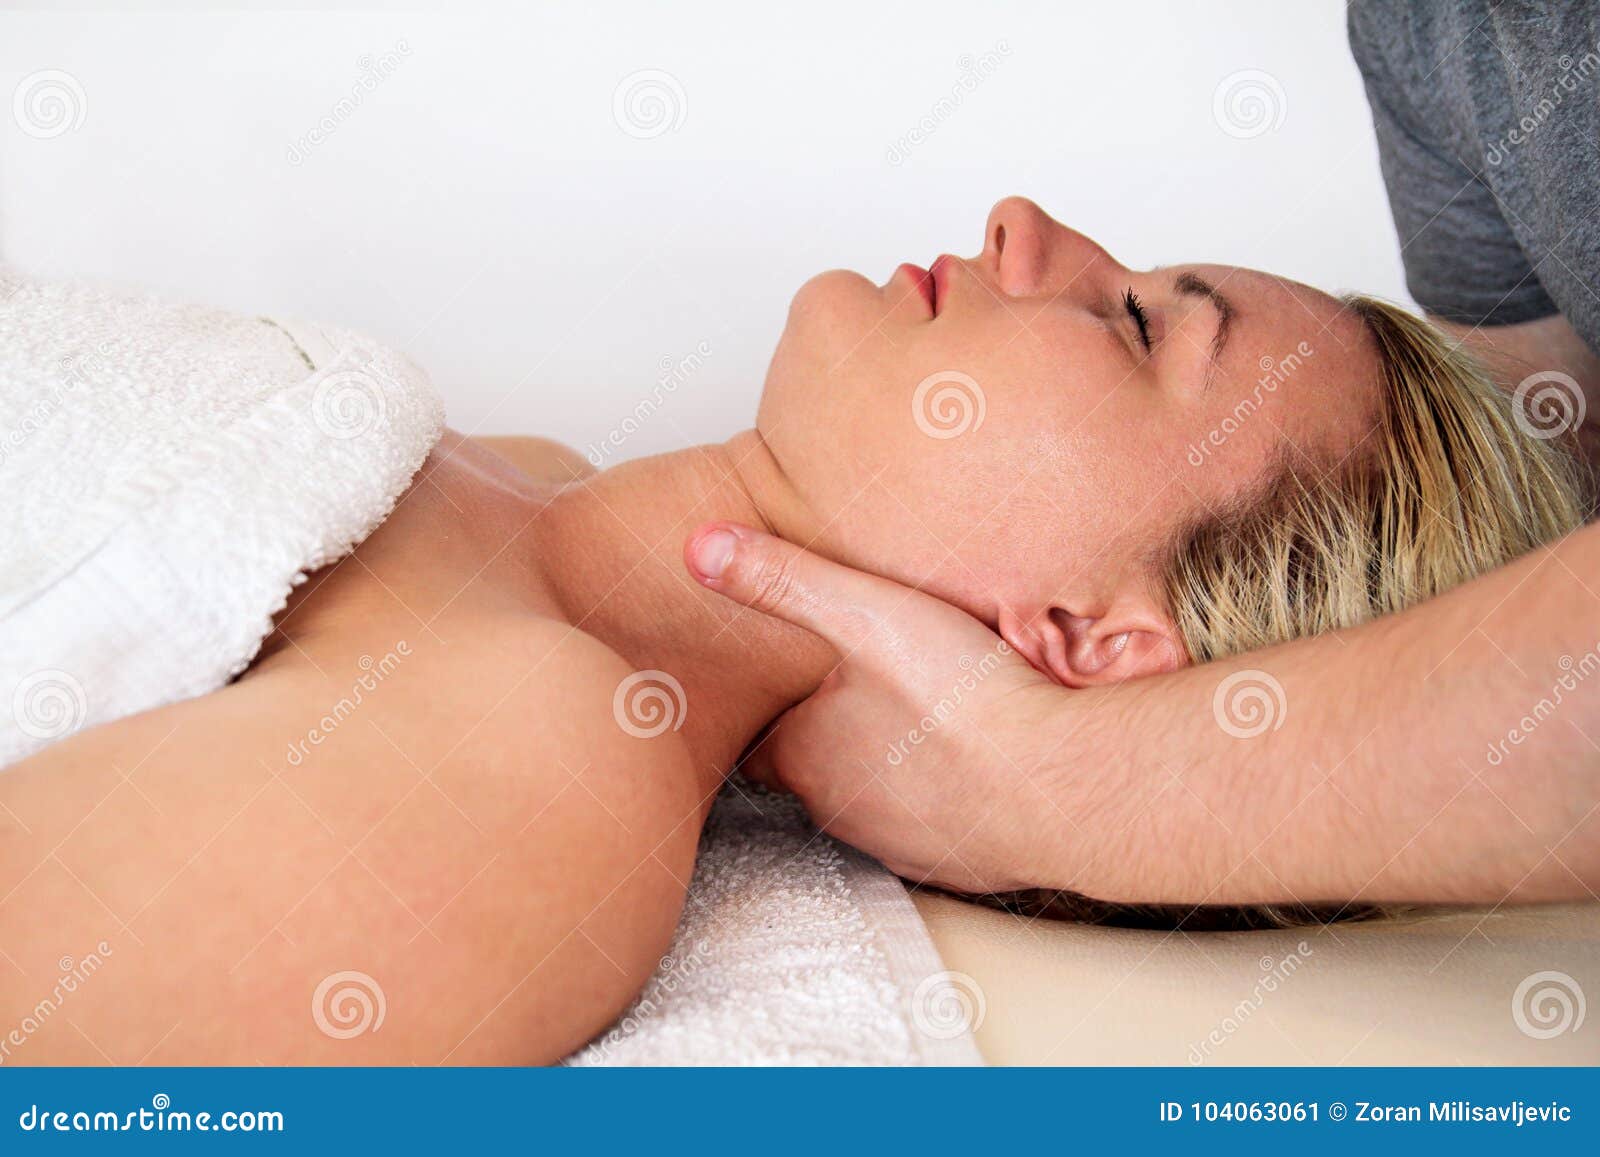 Woman Taking a Massage Neck Muscles at Massage Table Stoc pic